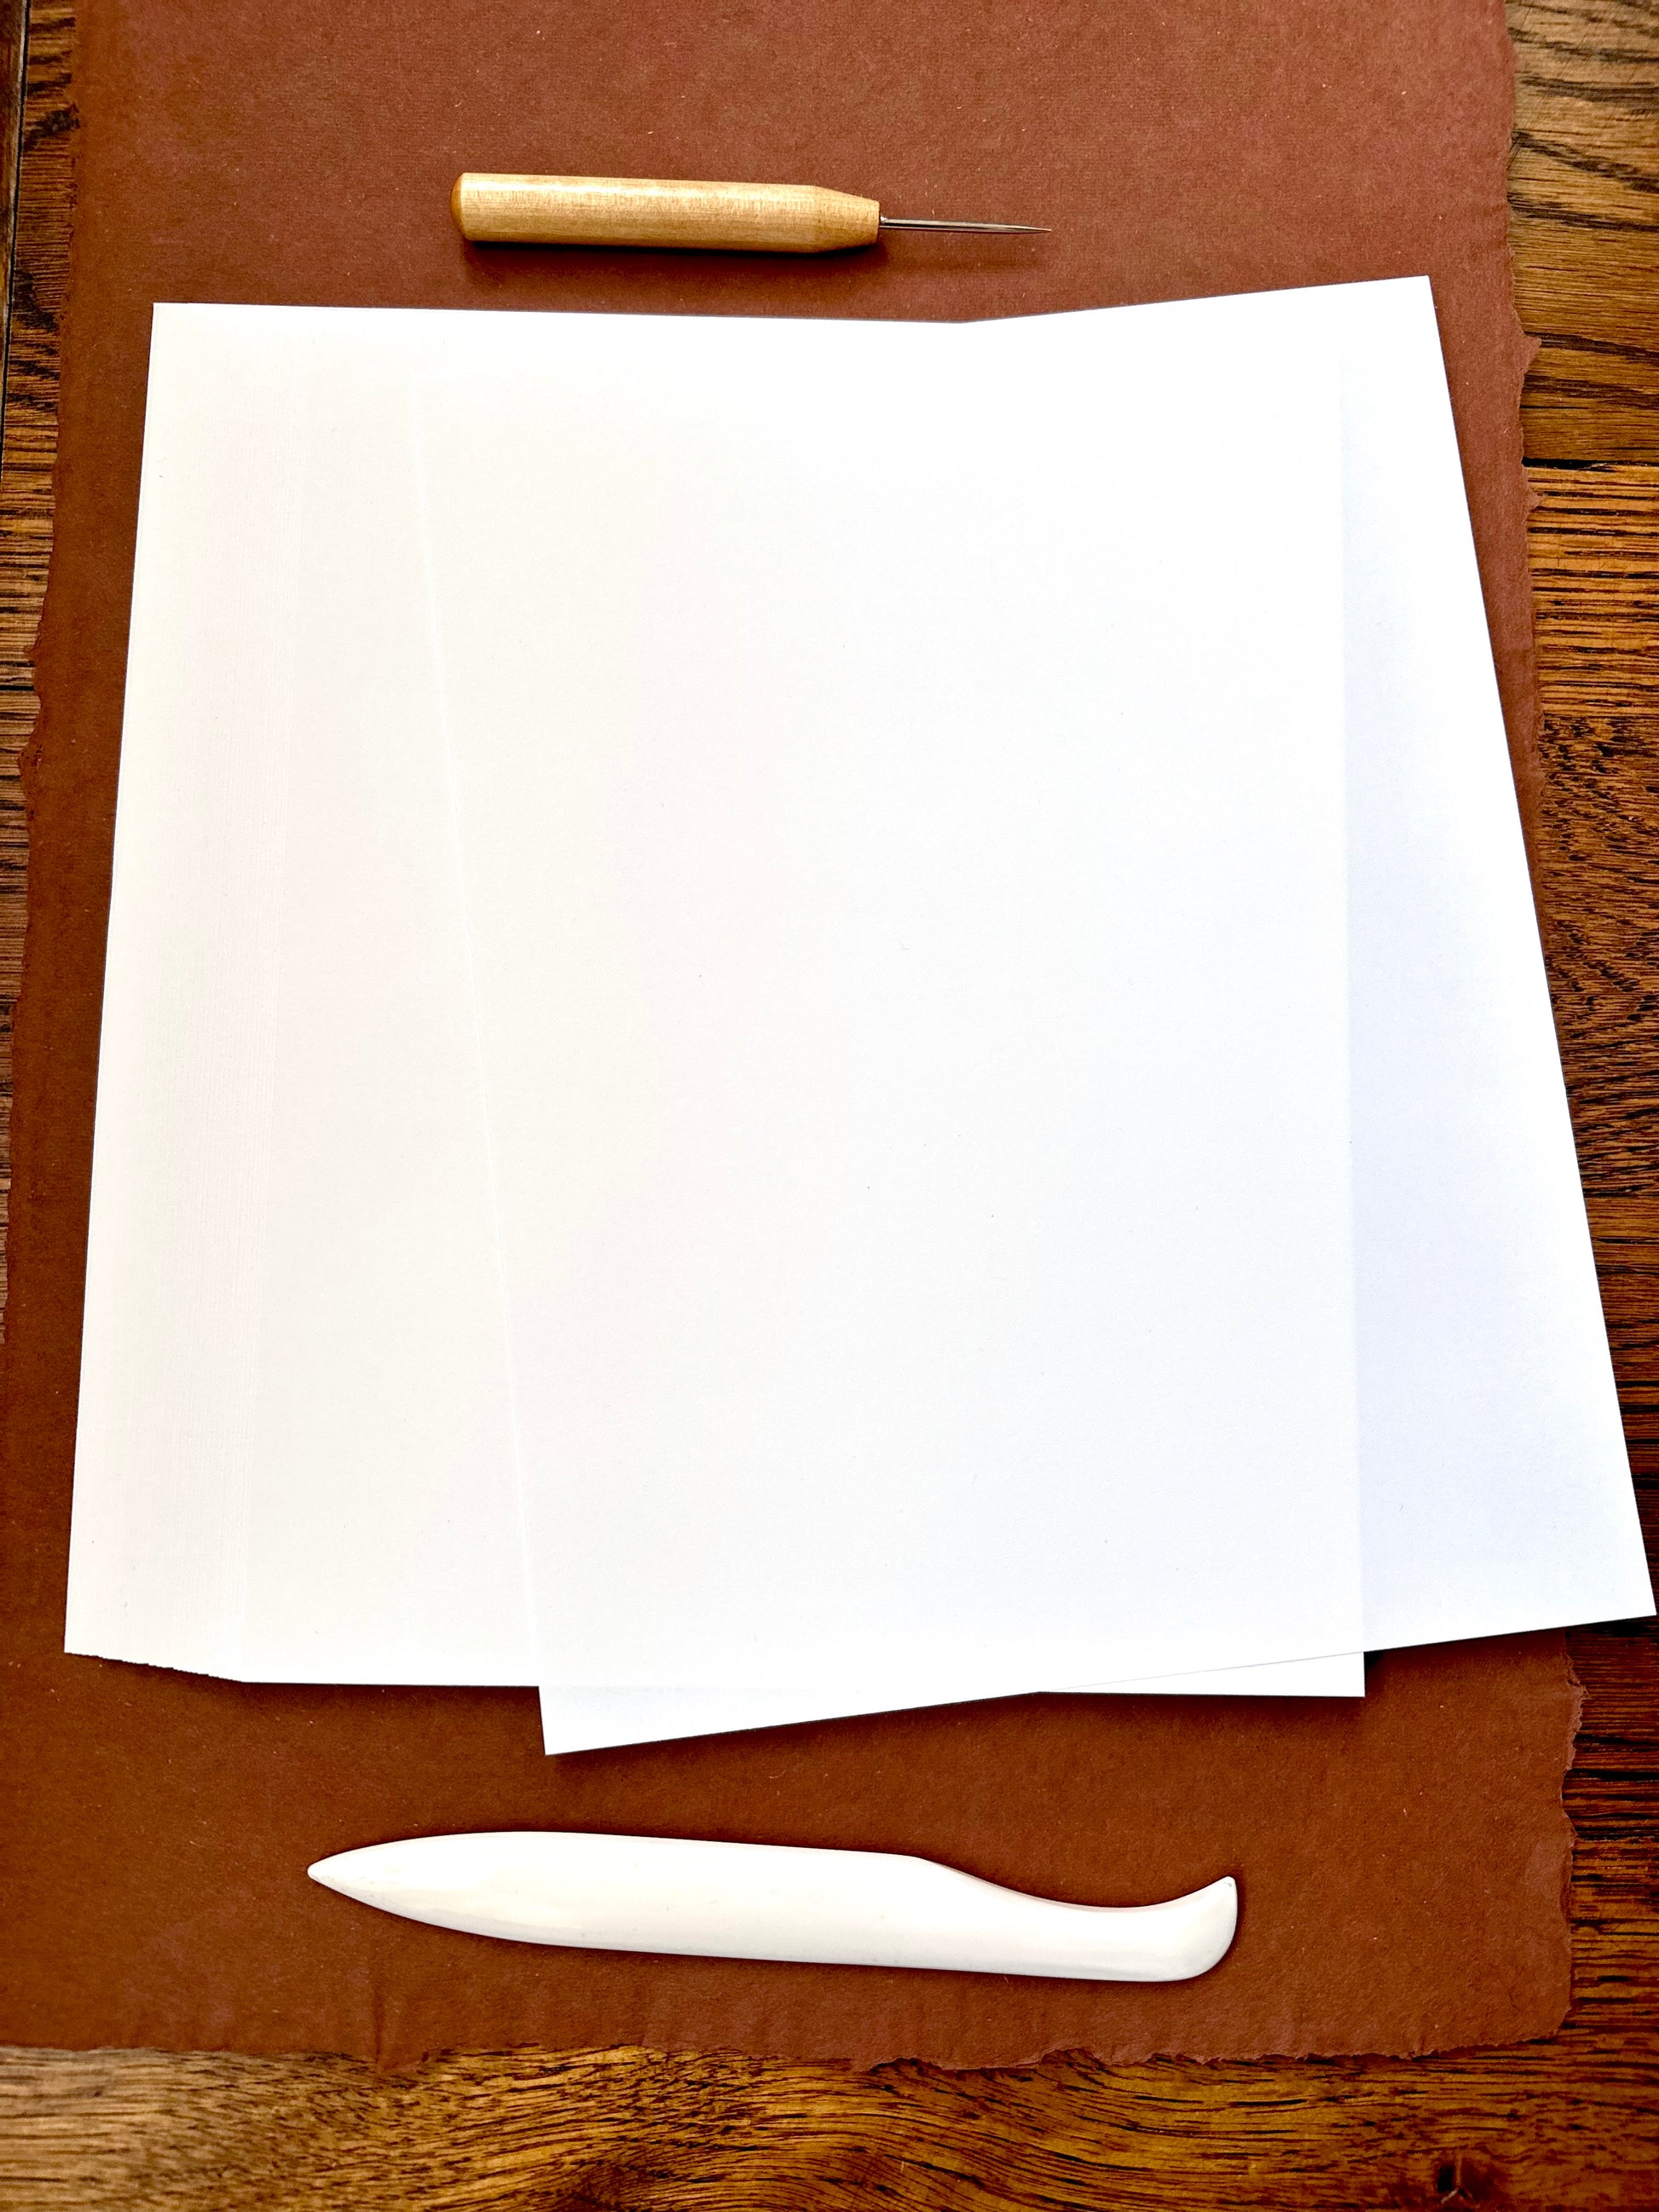 BLANK Short Grain Bookbinding Paper - 8.5" x 11"-  to enhance your book binding projects.  This smooth finish, 70 lb. text weight white paper is 20% post consumer waste and acid free, ensuring high quality and eco-friendly book binding projects.